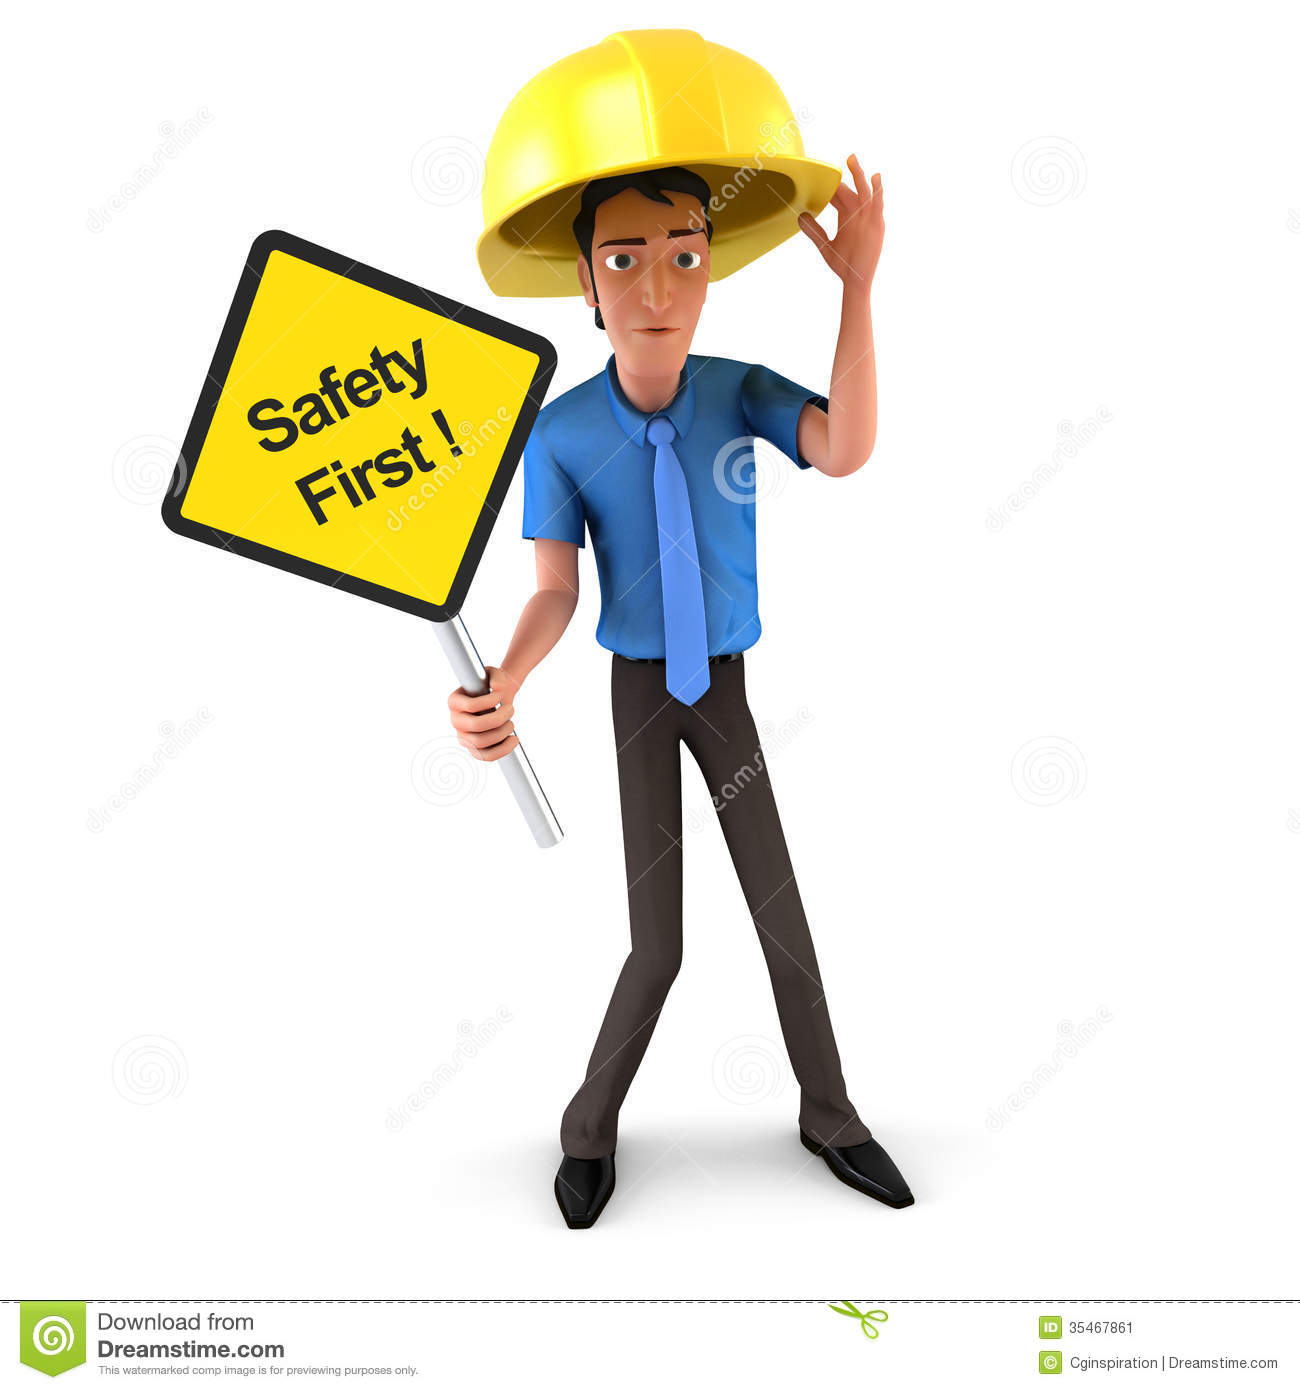 Safety First Stock Image   Image  35467861